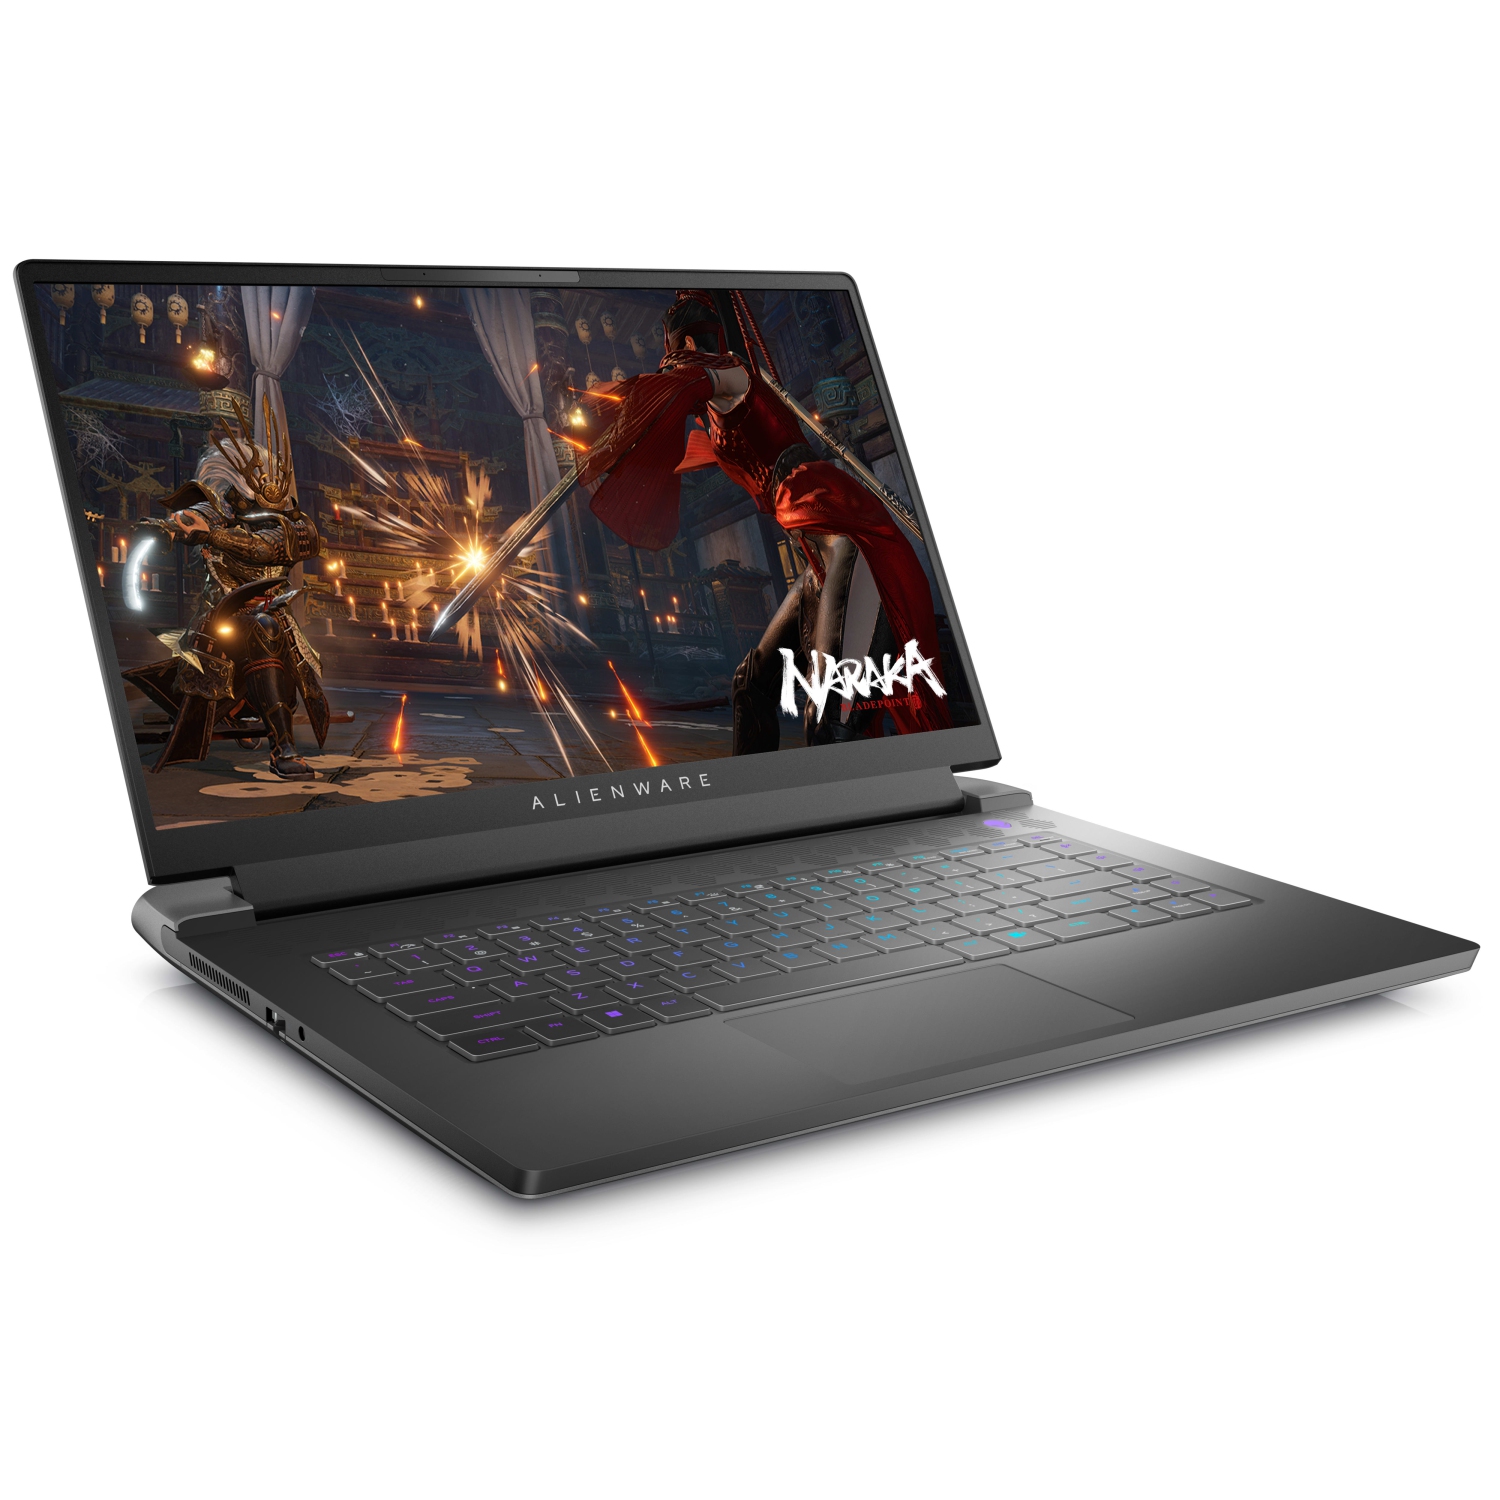 Refurbished (Excellent) – Dell Alienware m15 R7 Gaming Laptop (2022) | 15.6" QHD | Core i9 - 1TB SSD - 64GB RAM - RTX 3080 | 14 Cores @ 5 GHz - 12th Gen CPU - 8GB GDDR6X